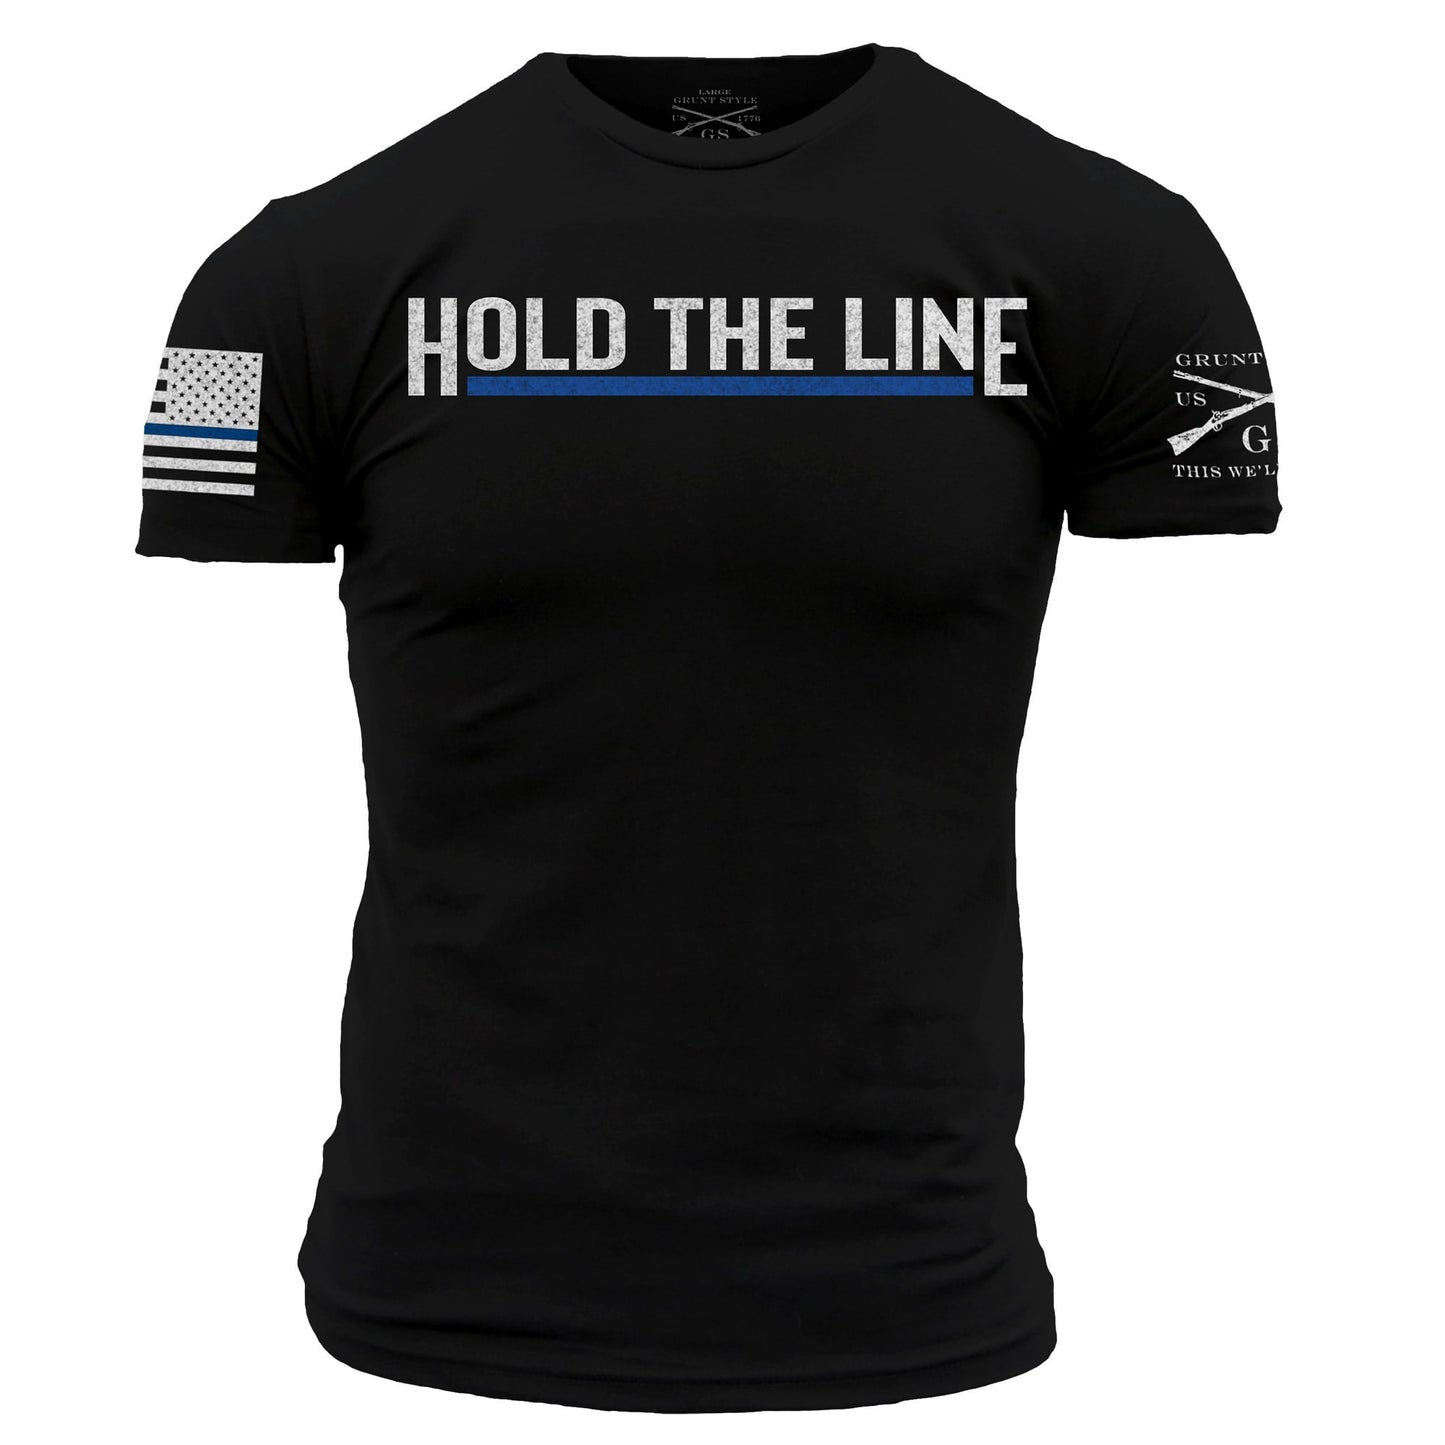 Hold The Line Shirt for Men | Grunt Style